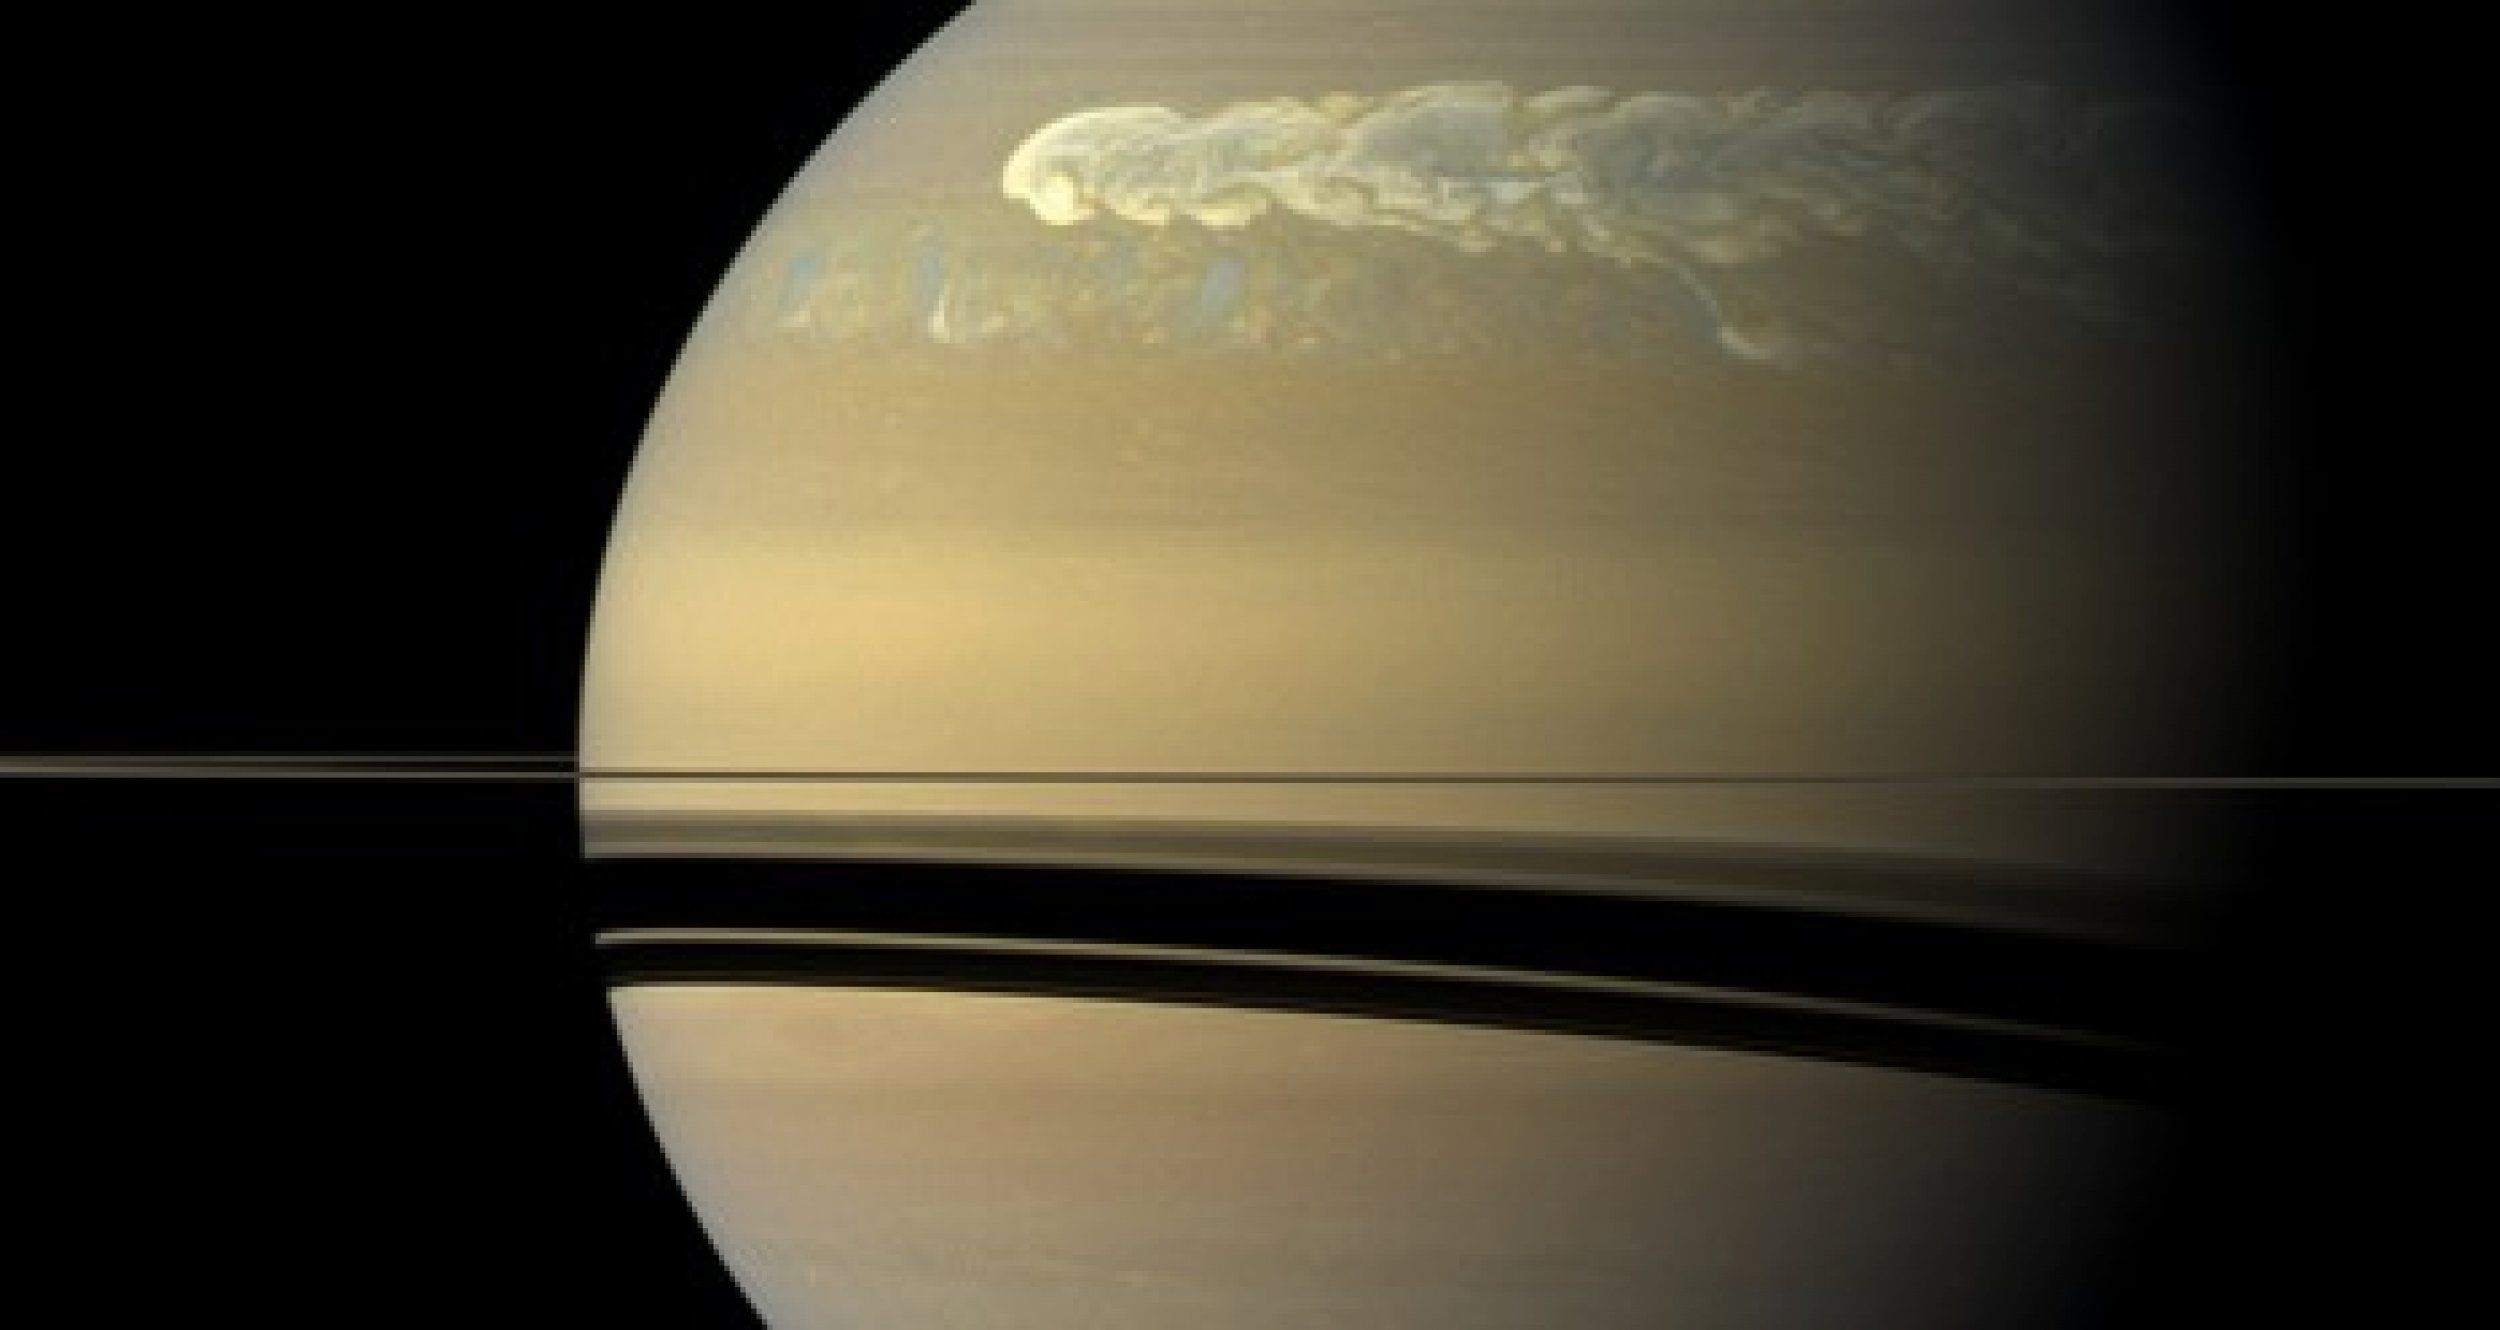 Scientists analyzing data from NASA039s Cassini spacecraft now have the first-ever, up-close details of a Saturn storm